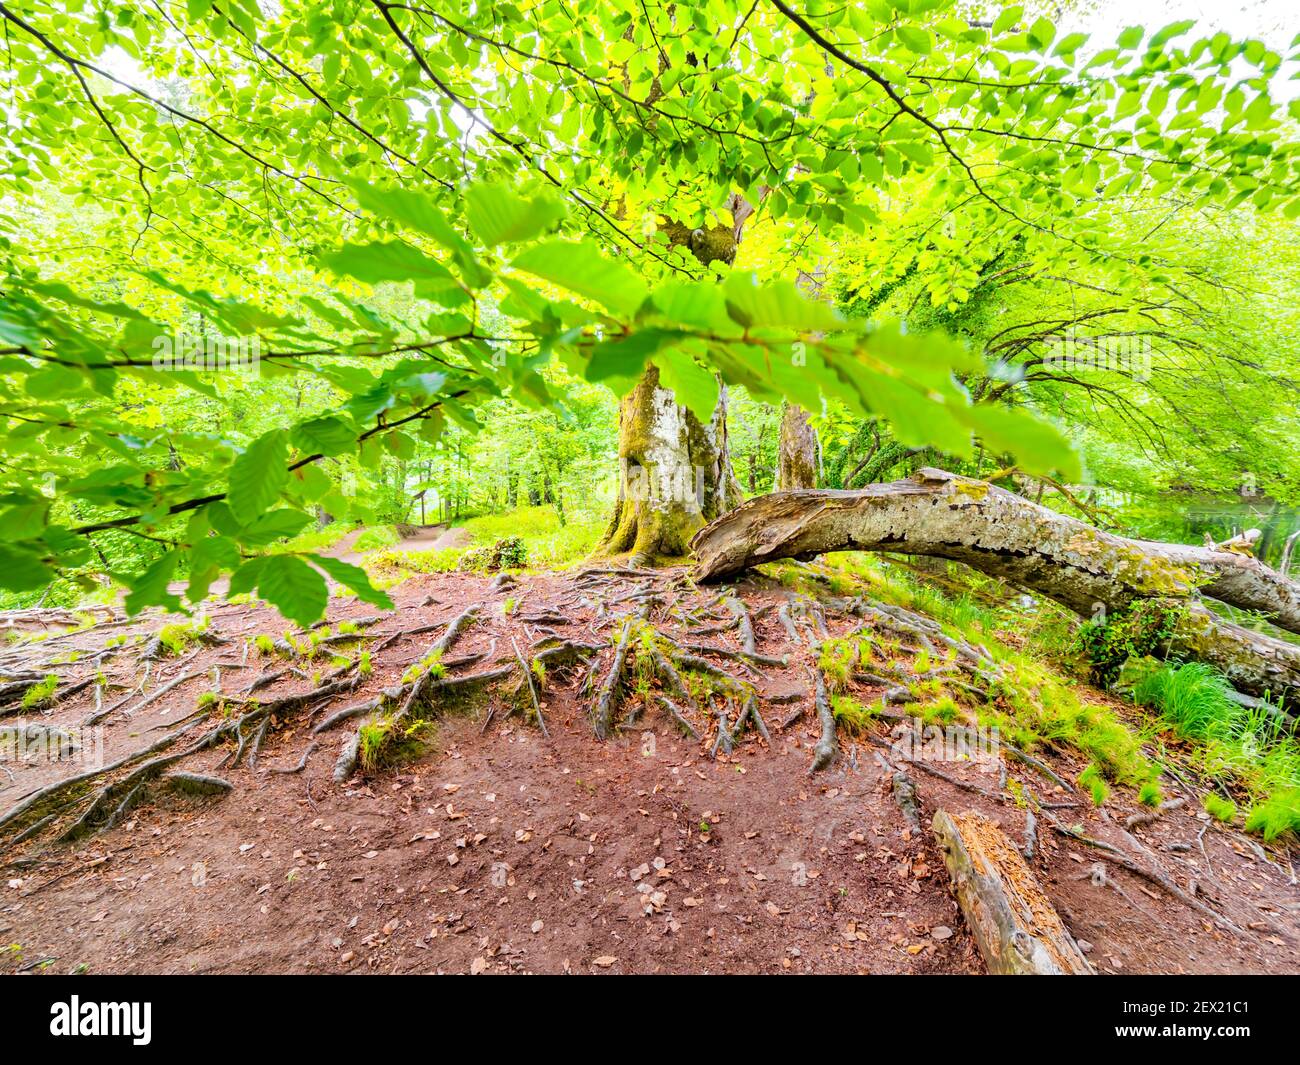 Plitvice lakes national park prominent tree roots visible on ground protruding through earth surface under foliage canopy Stock Photo